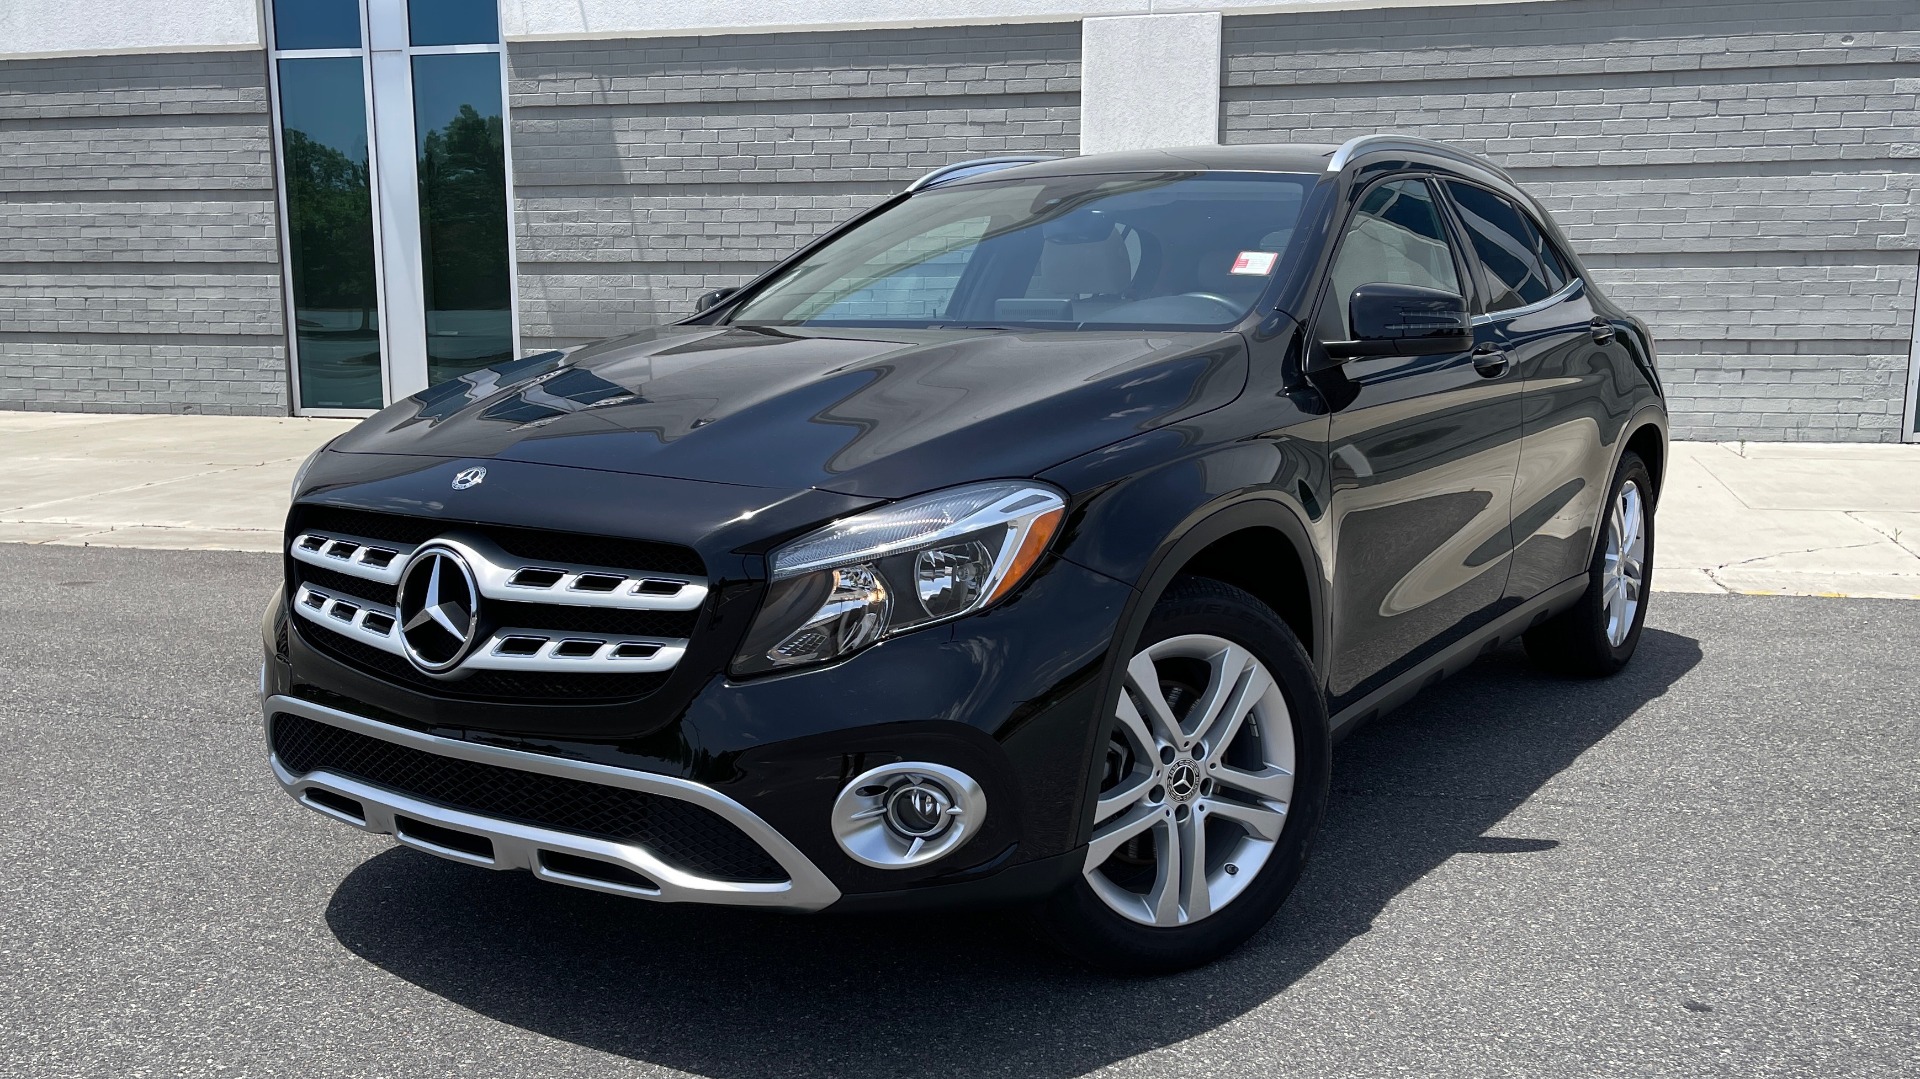 Used 2018 Mercedes-Benz GLA 250 4MATIC SUV / PANO-ROOF / HTD STS / BLIND SPOT ASST / APPLE for sale Sold at Formula Imports in Charlotte NC 28227 1